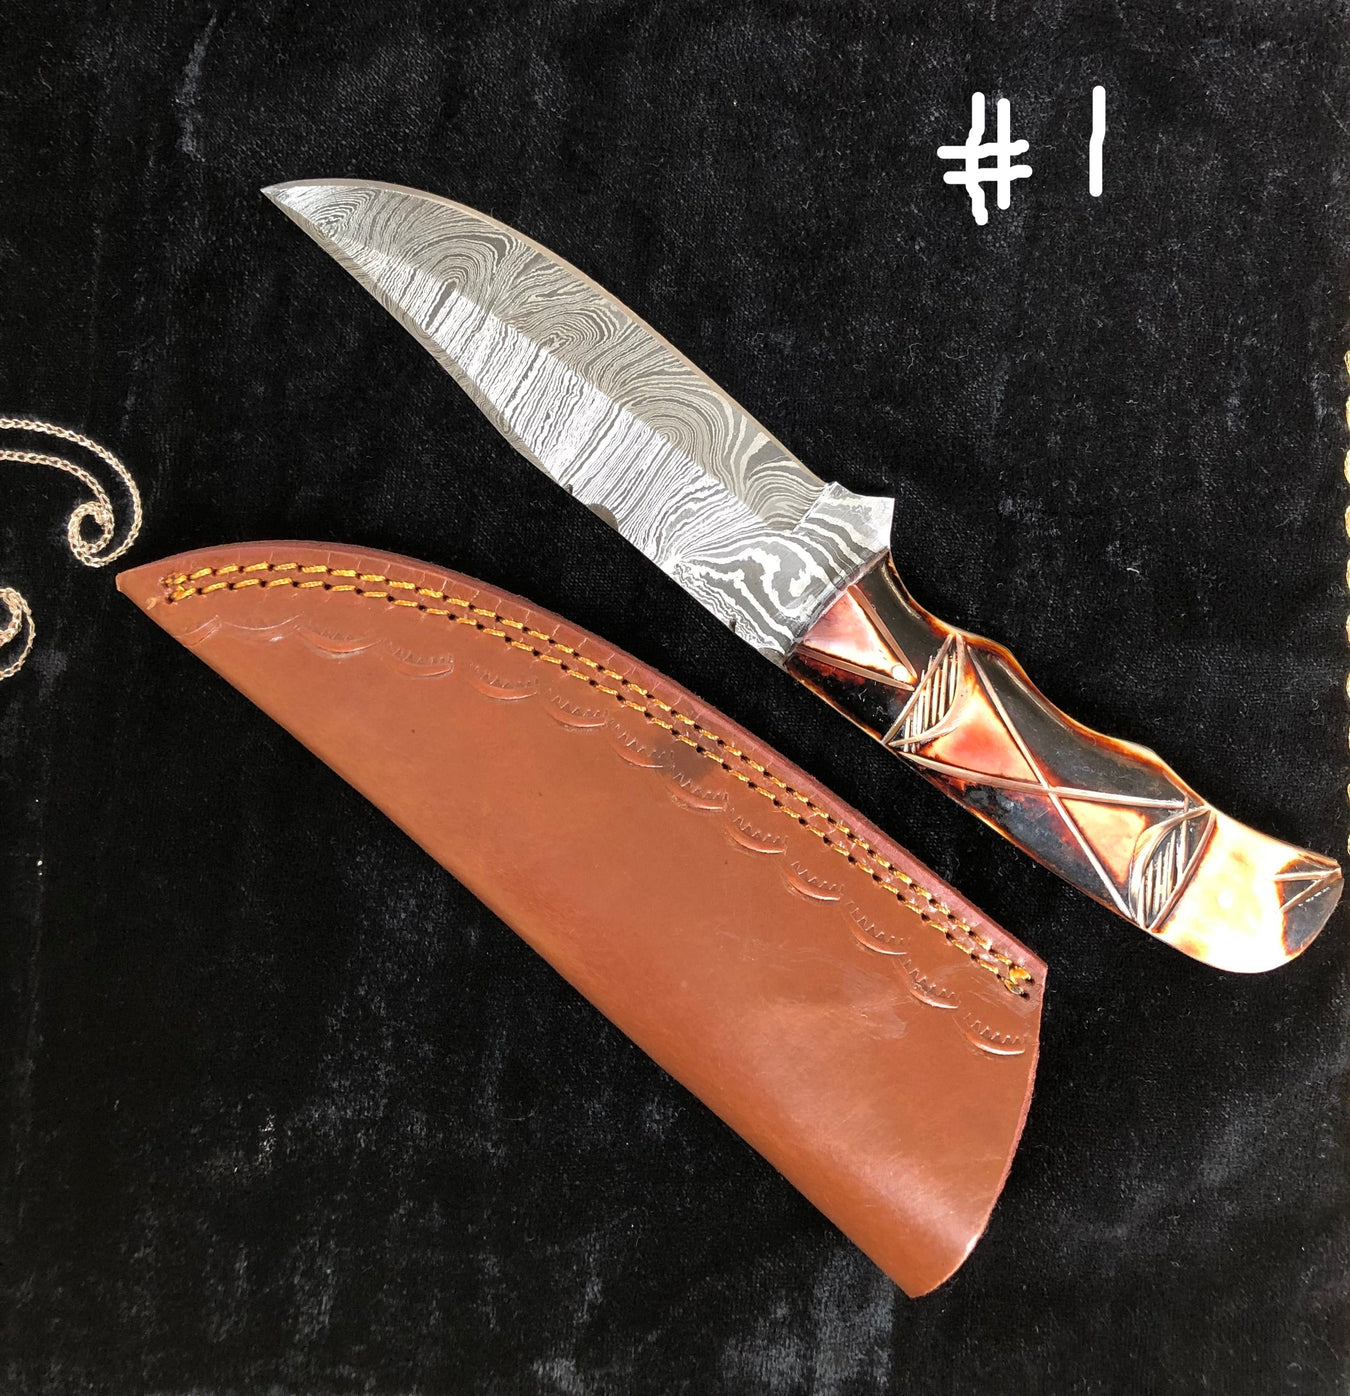 New Damascus fixed blade knife collection